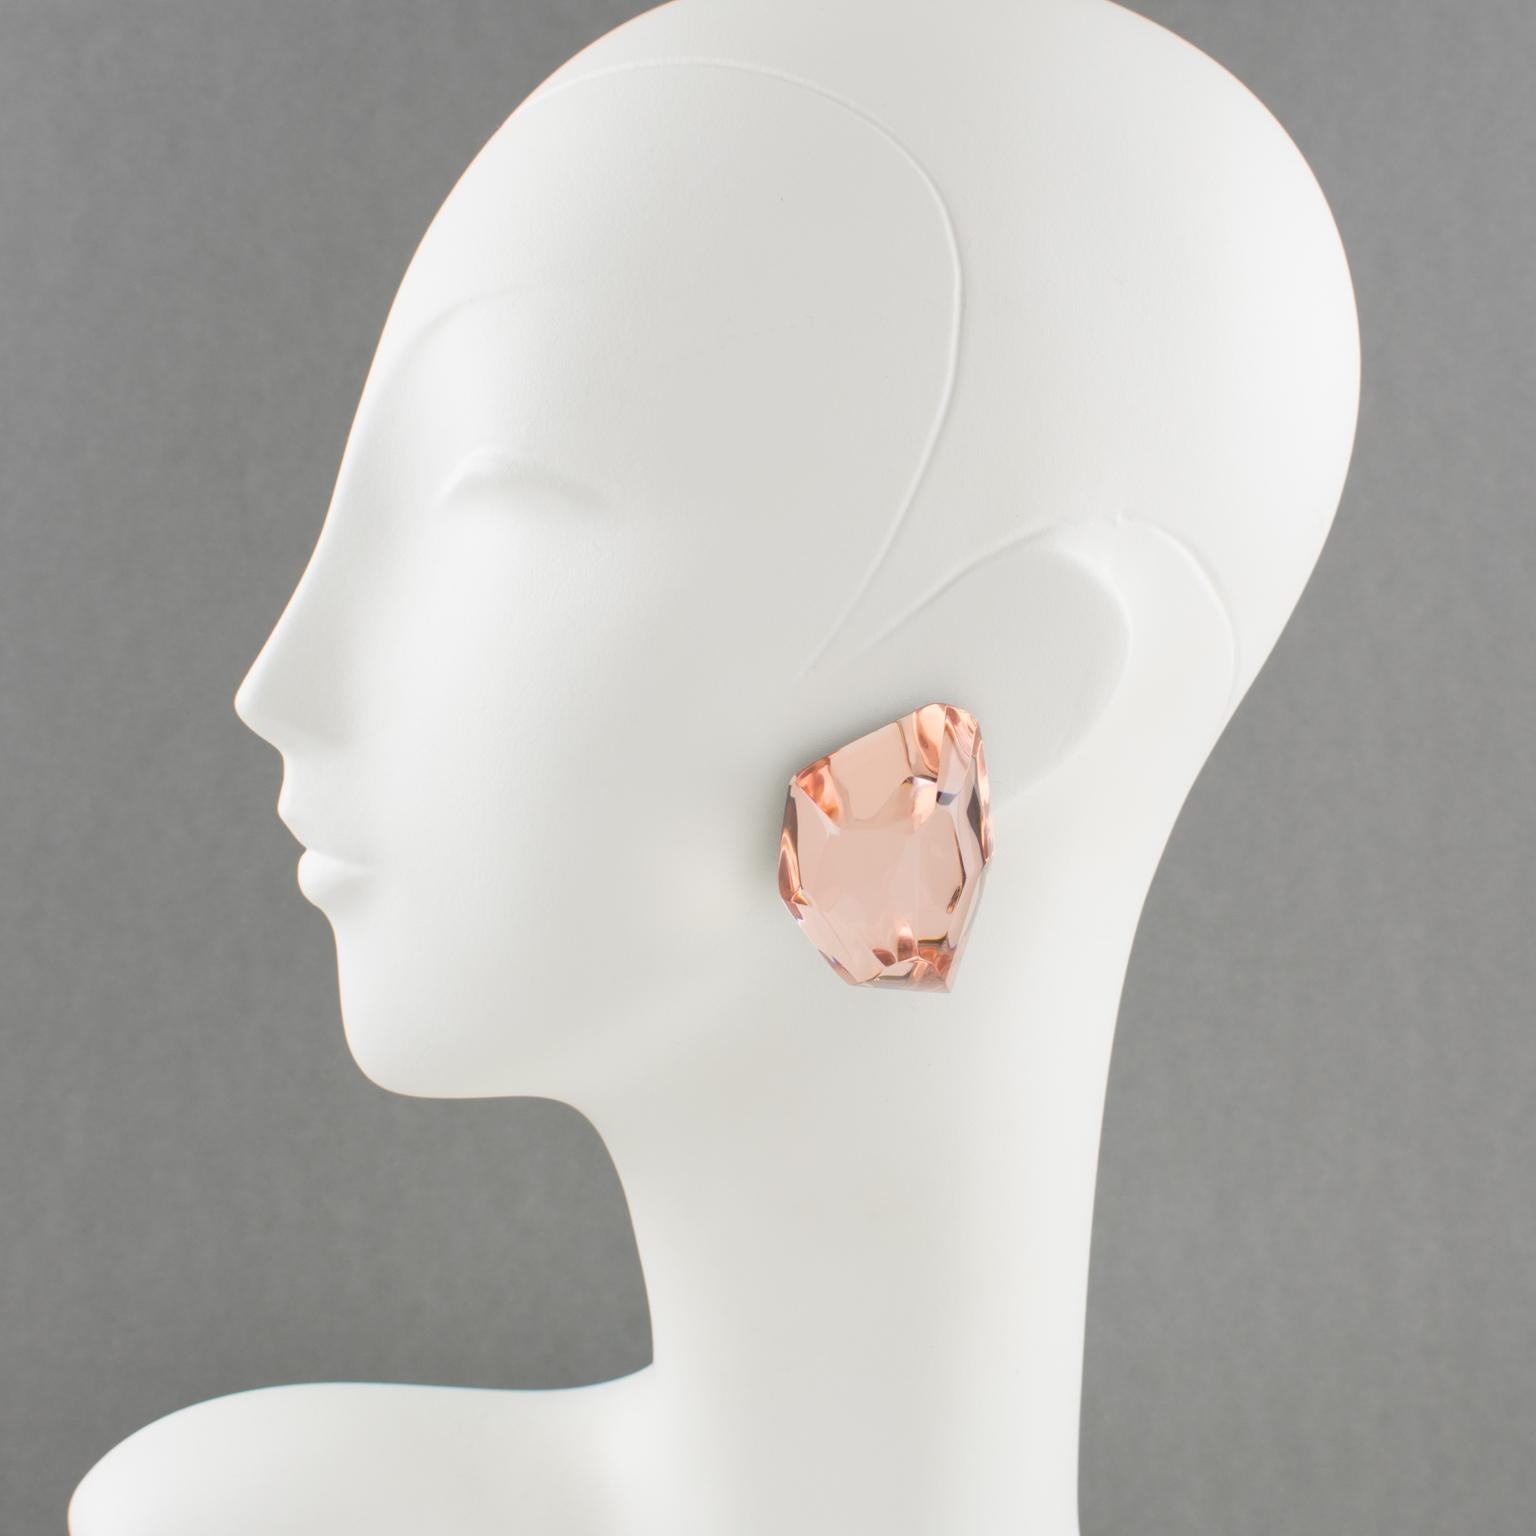 Stunning oversized Lucite clip-on earrings designed by Harriet Bauknight for Kaso. Featuring a huge dimensional ice cube with a copper pink mirror textured pattern and beveling edges all around. 
Kaso paper sticker missing but the gray background